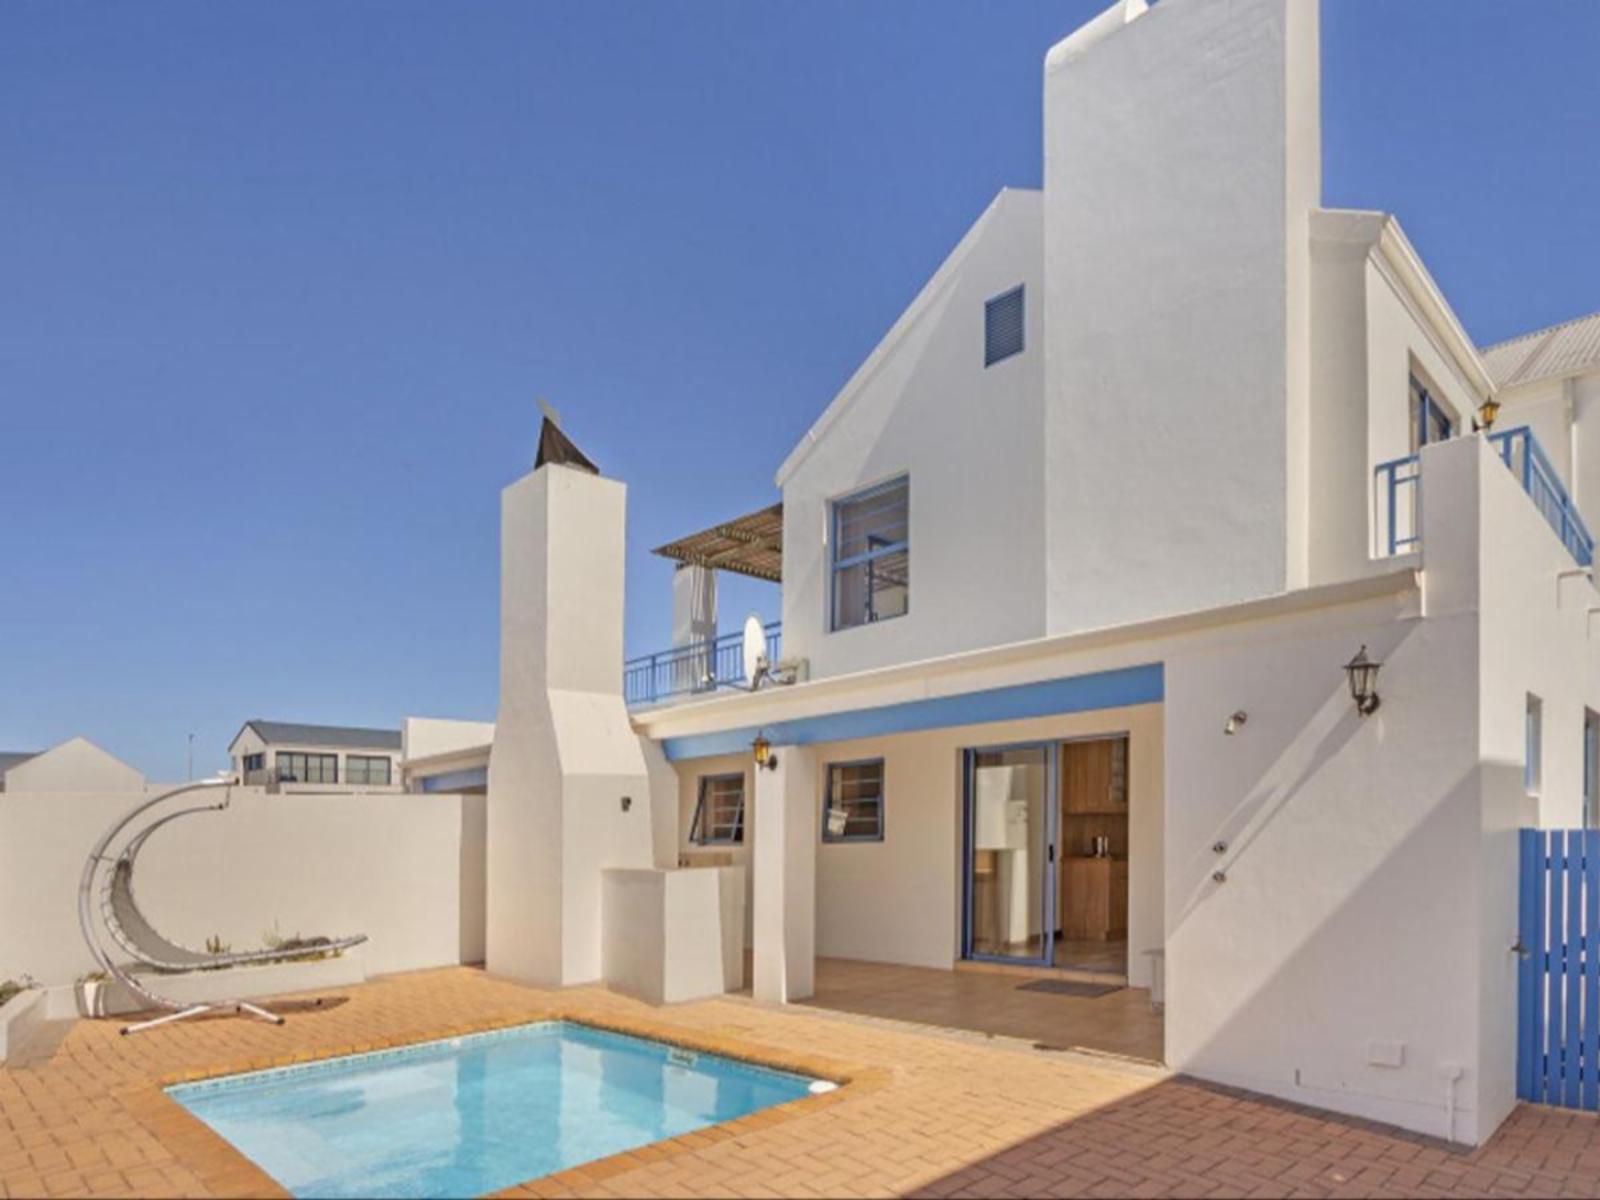 Oyster Retreat By Hostagents Calypso Beach Langebaan Western Cape South Africa House, Building, Architecture, Swimming Pool